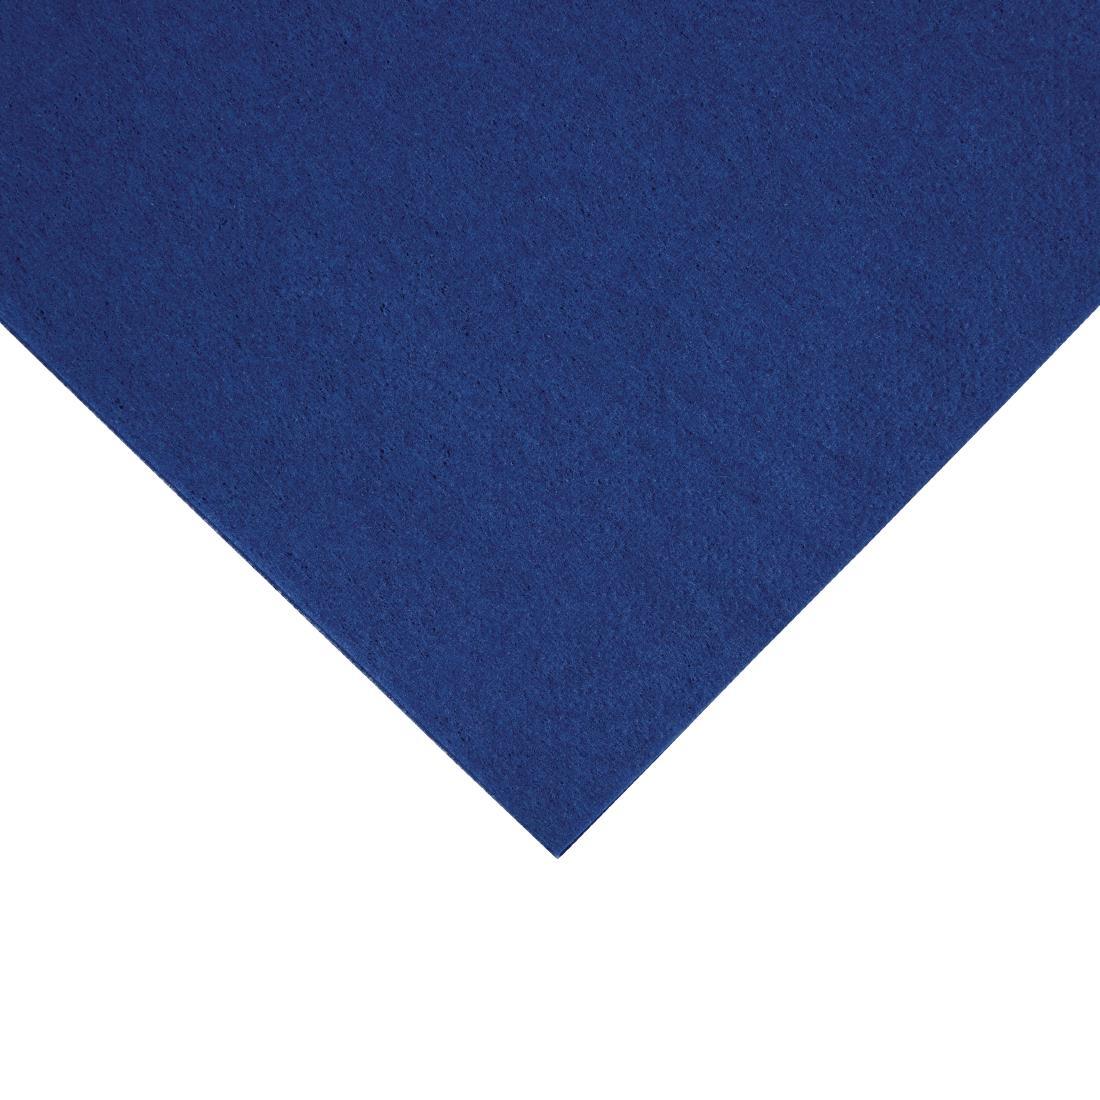 Fiesta Recyclable Lunch Napkin Blue 33x33cm 2ply 1/4 Fold (Pack of 2000) - FE224  - 2